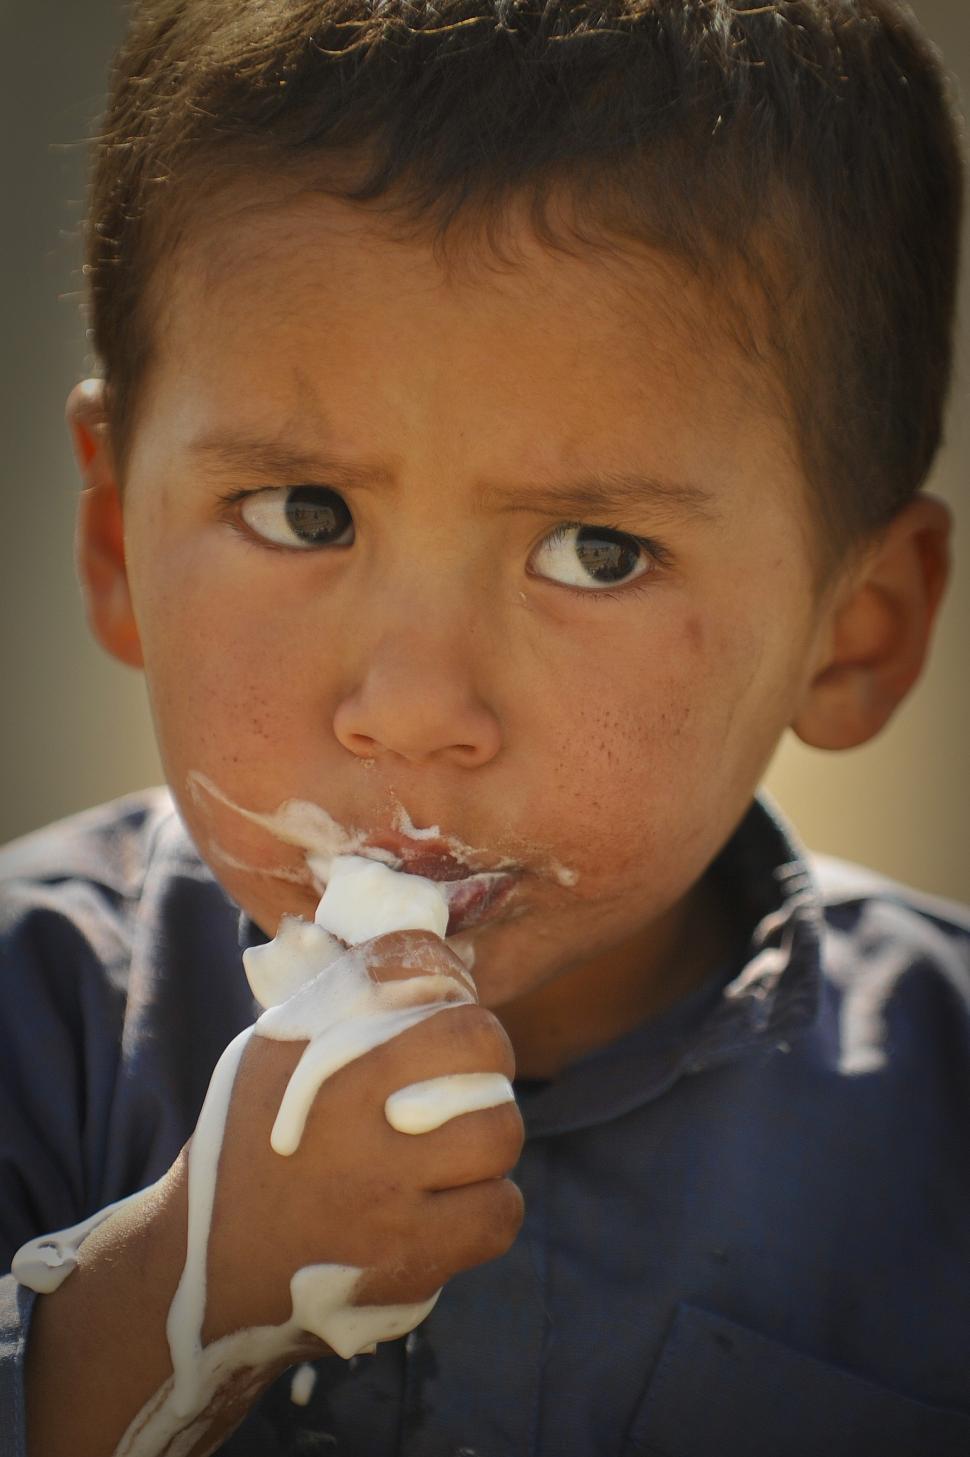 Free Image of Young Boy Eating a Piece of Cake 